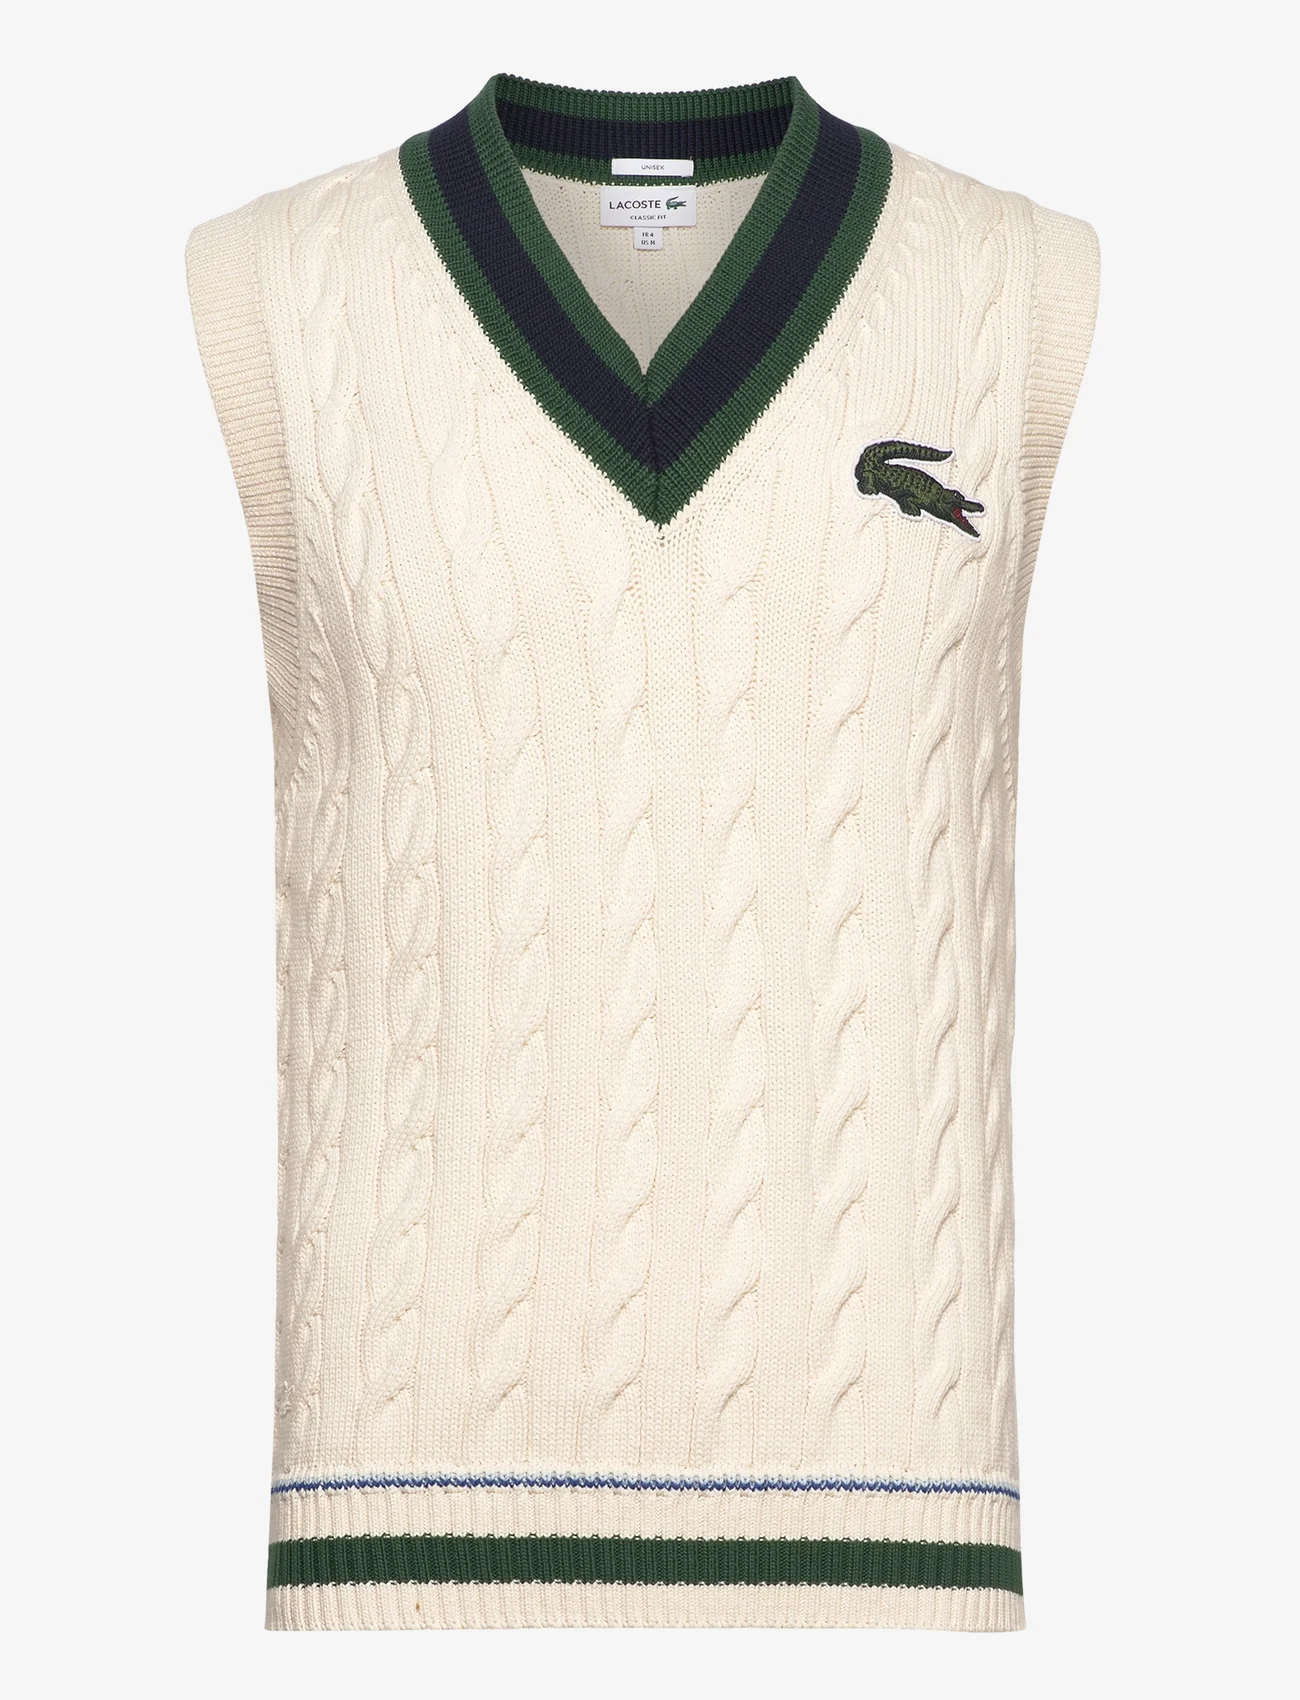 Lacoste Sweaters - Tops - Boozt.com